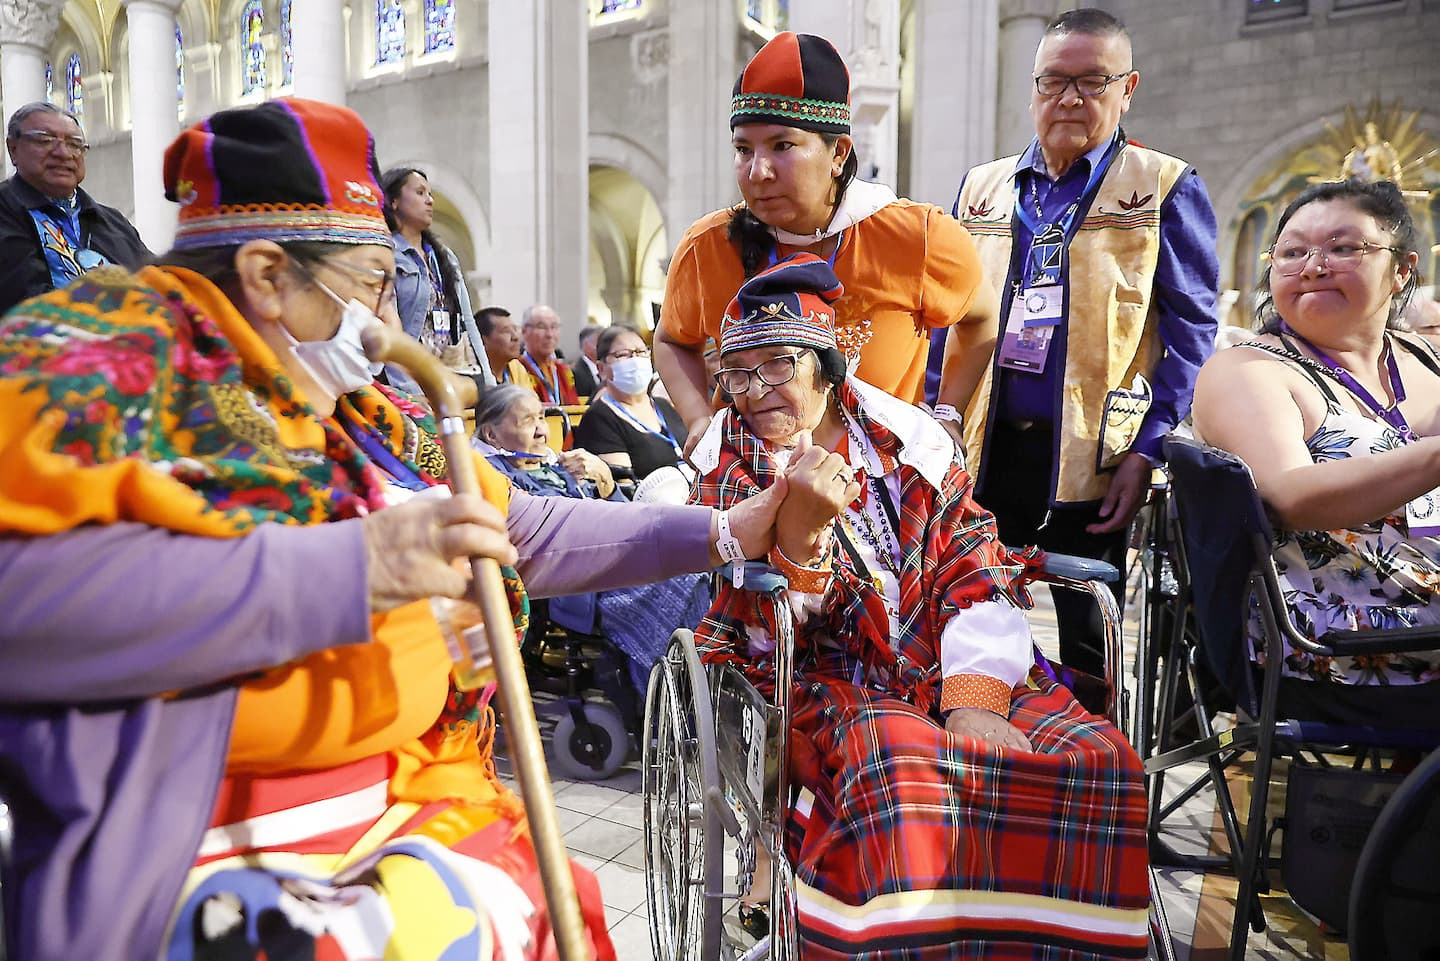 Pope's visit and apology: mixed reactions from indigenous communities